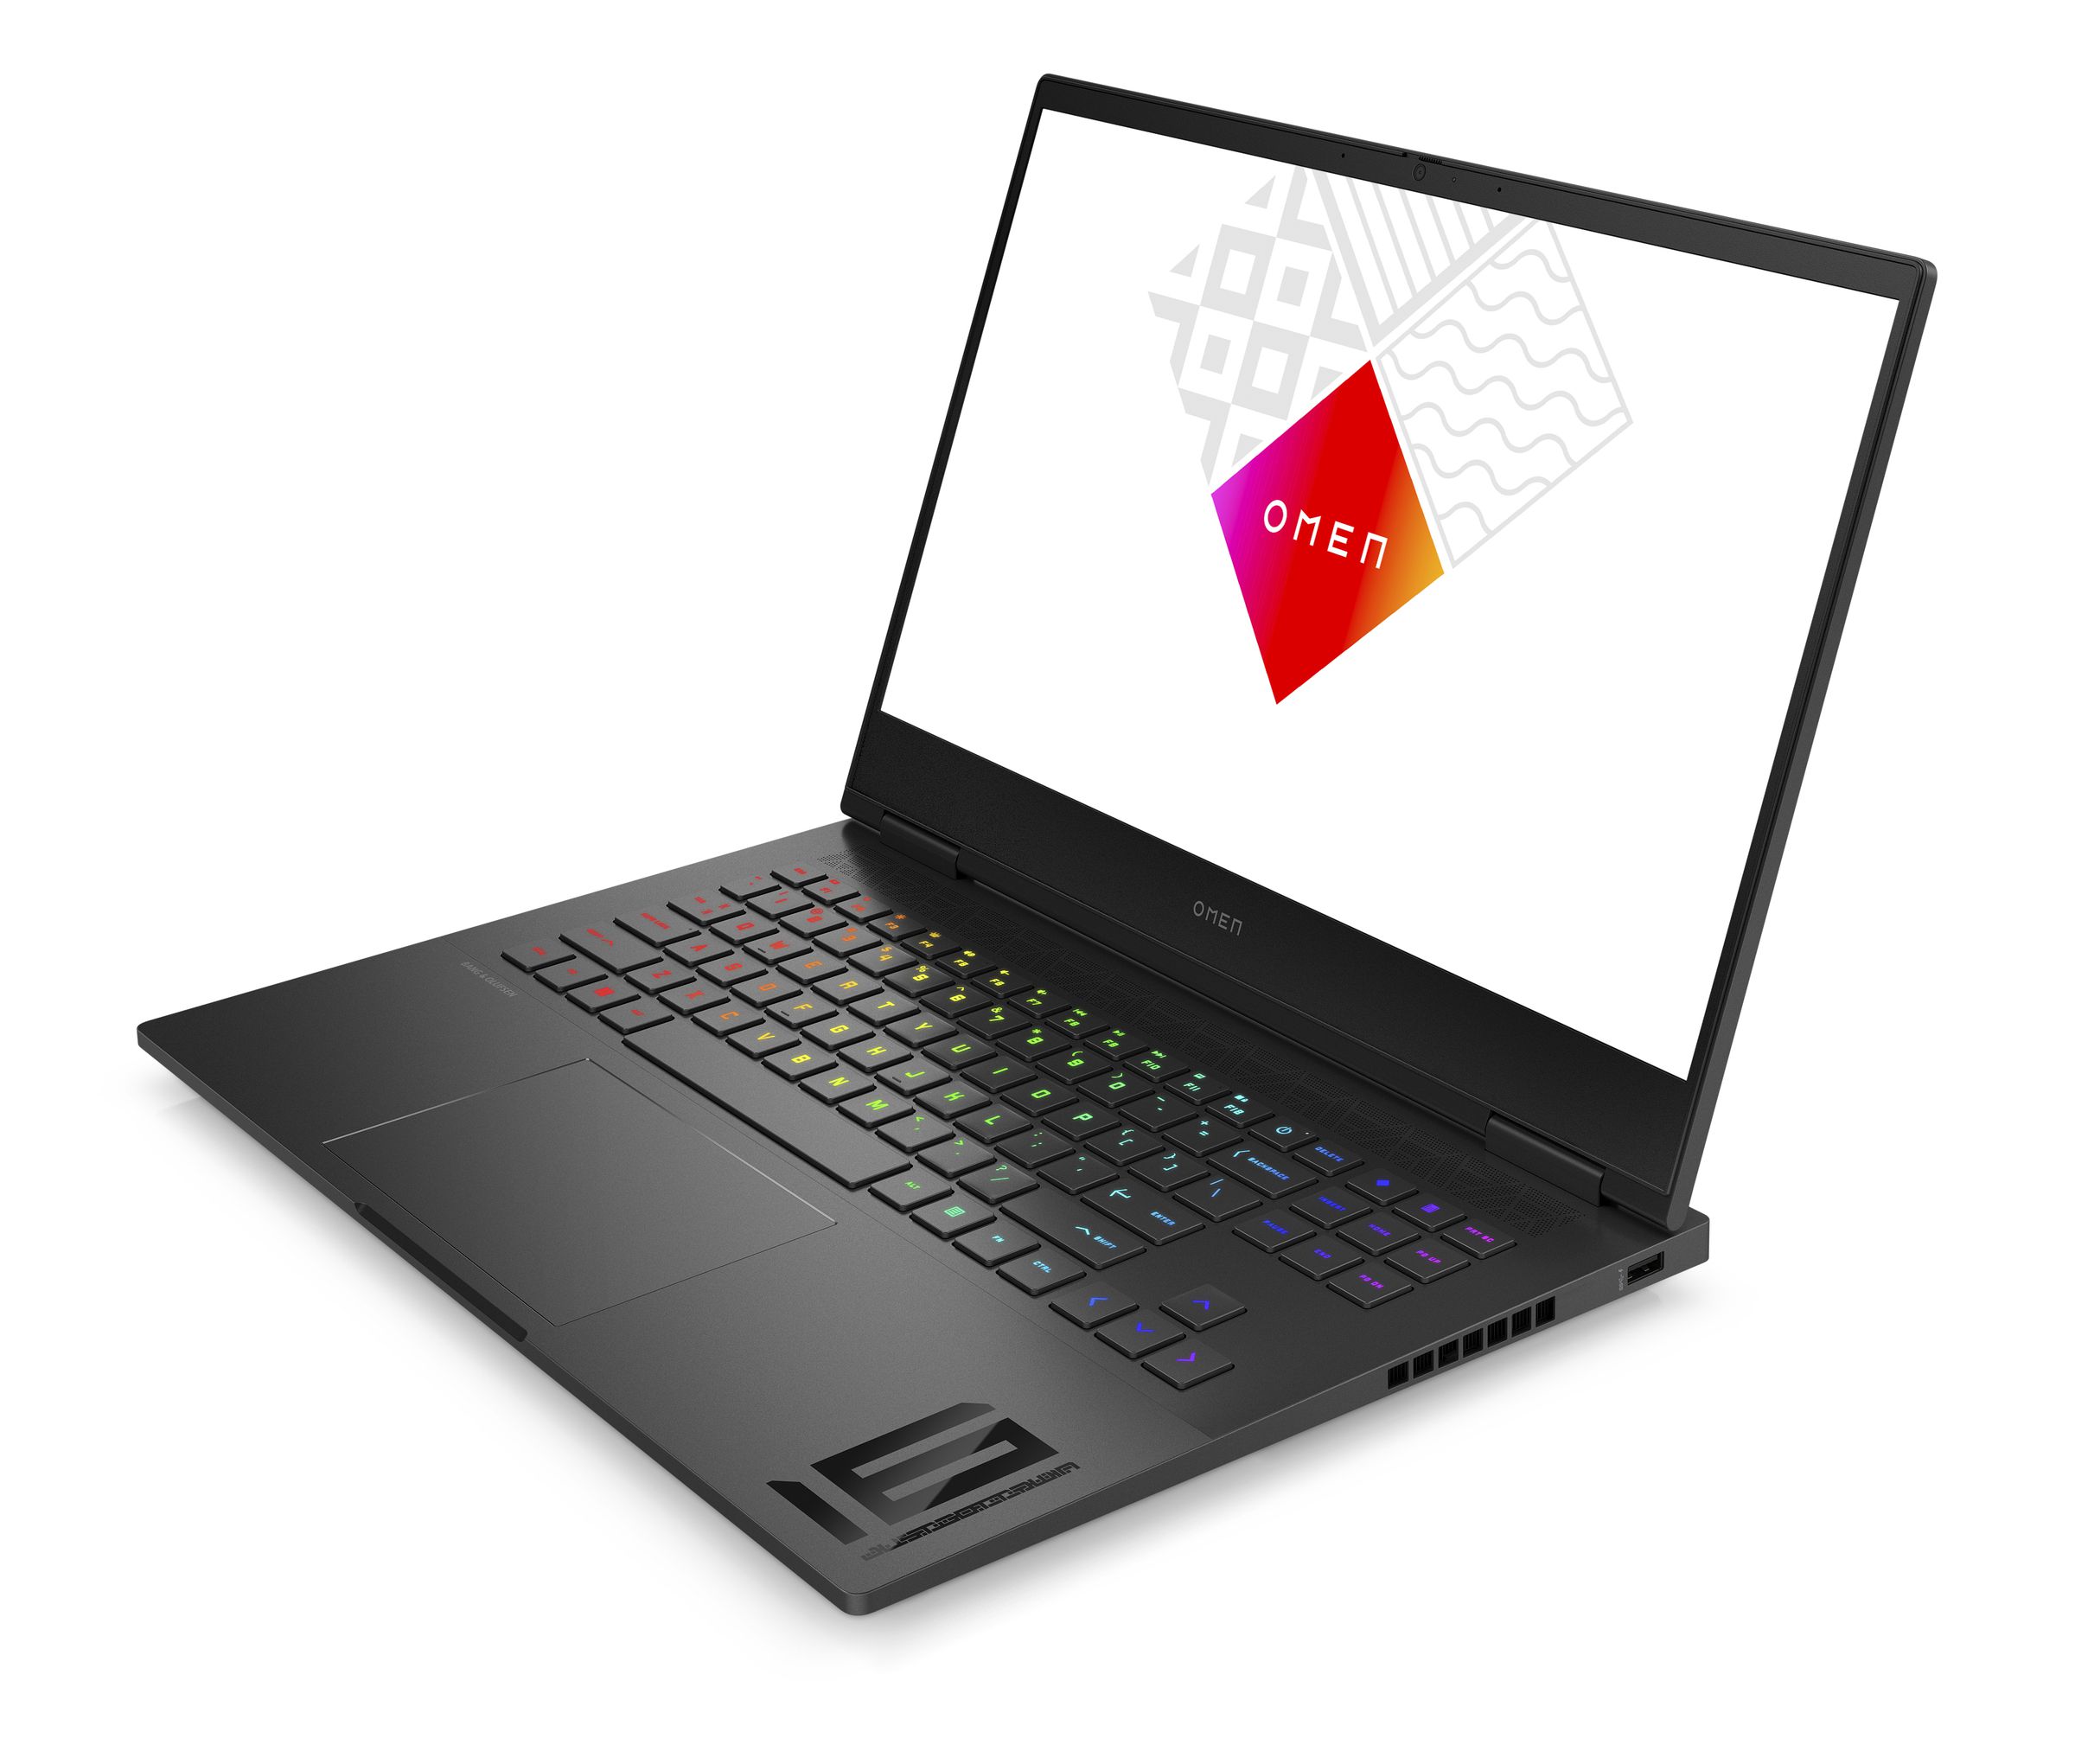 The HP Omen 16 open on a white background with the RGB keyboard illuminated and the screen displaying the Omen logo.